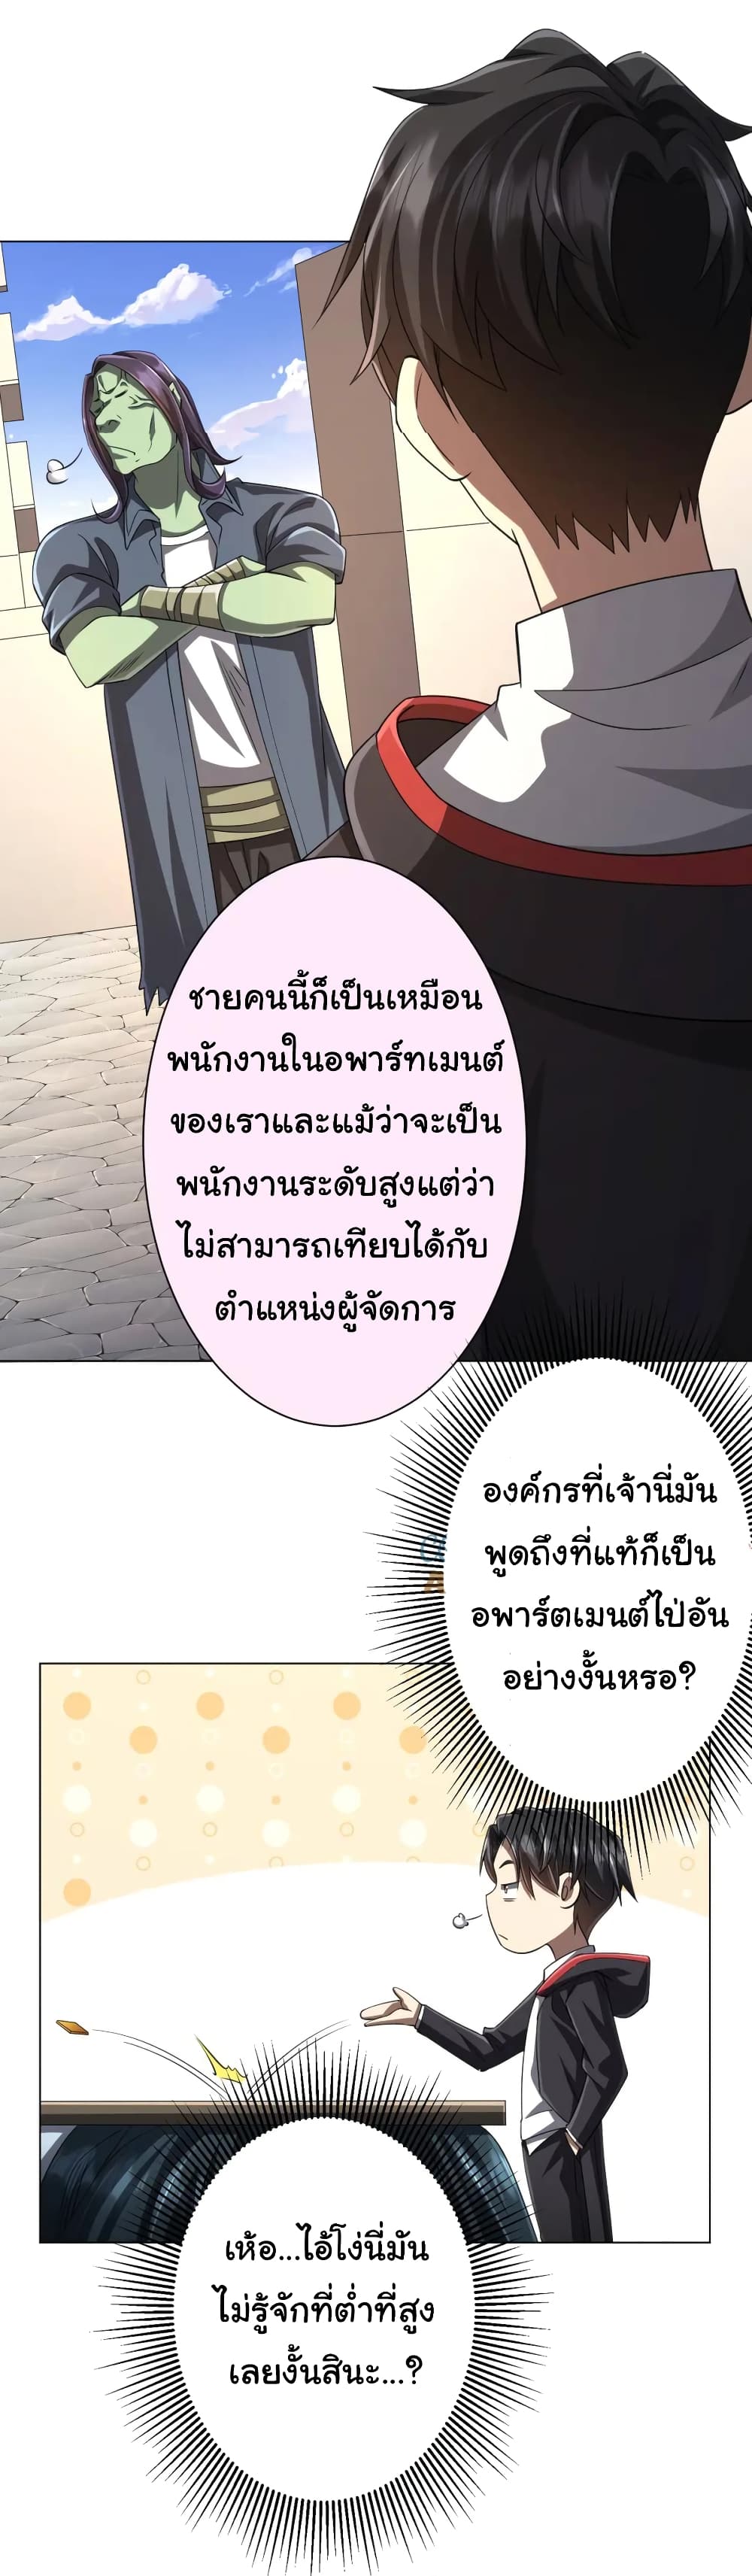 Start with Trillions of Coins ตอนที่ 53 (27)